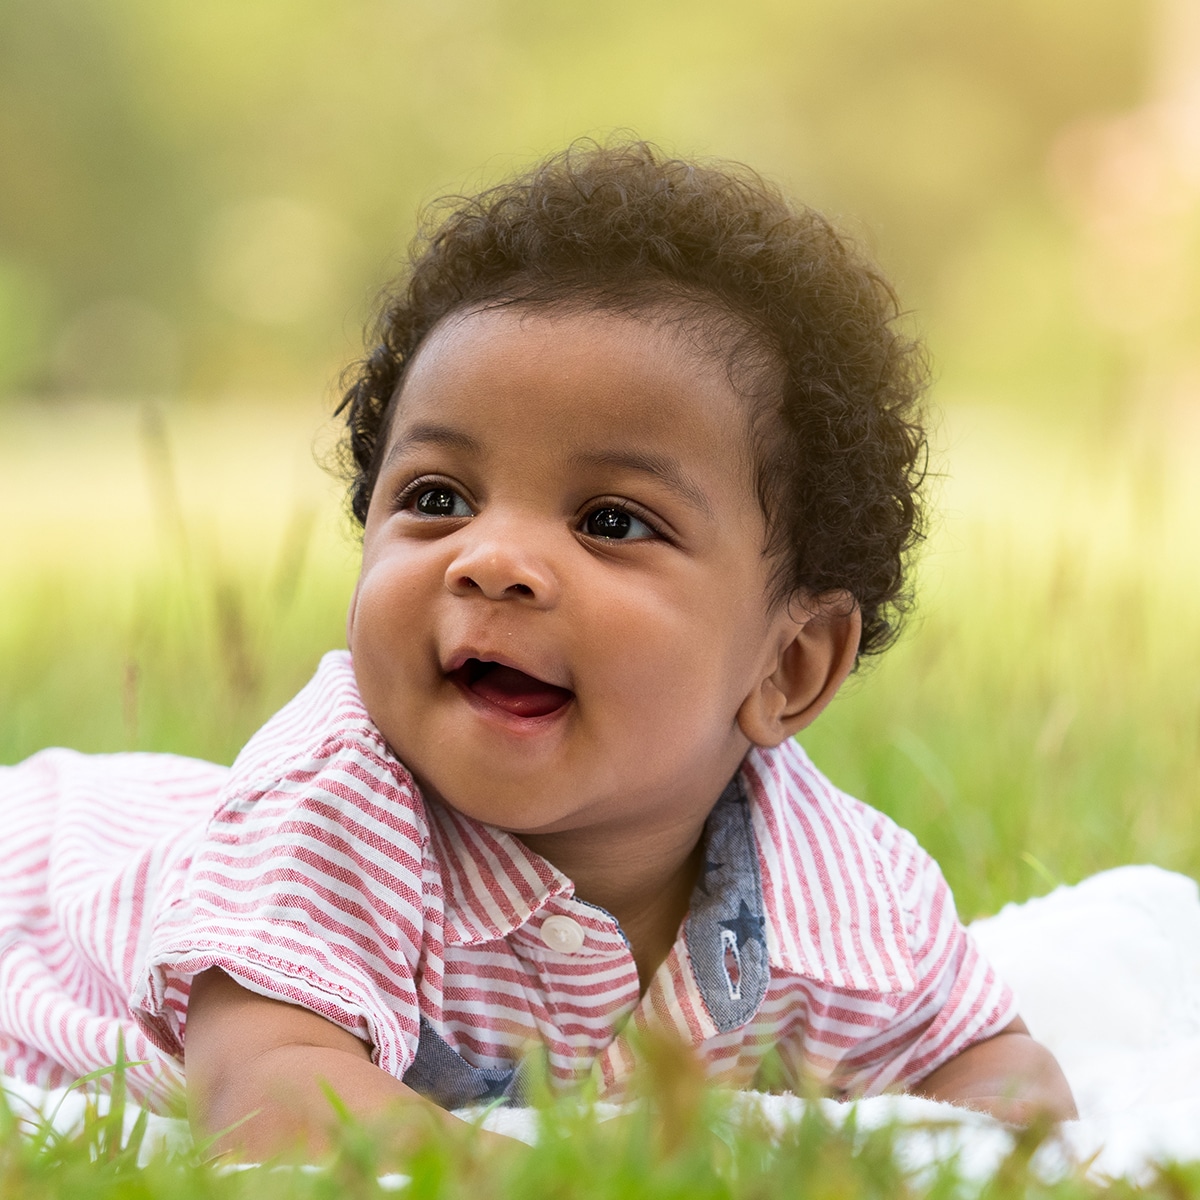 Outdoor Play Introduces Your Baby To Nature